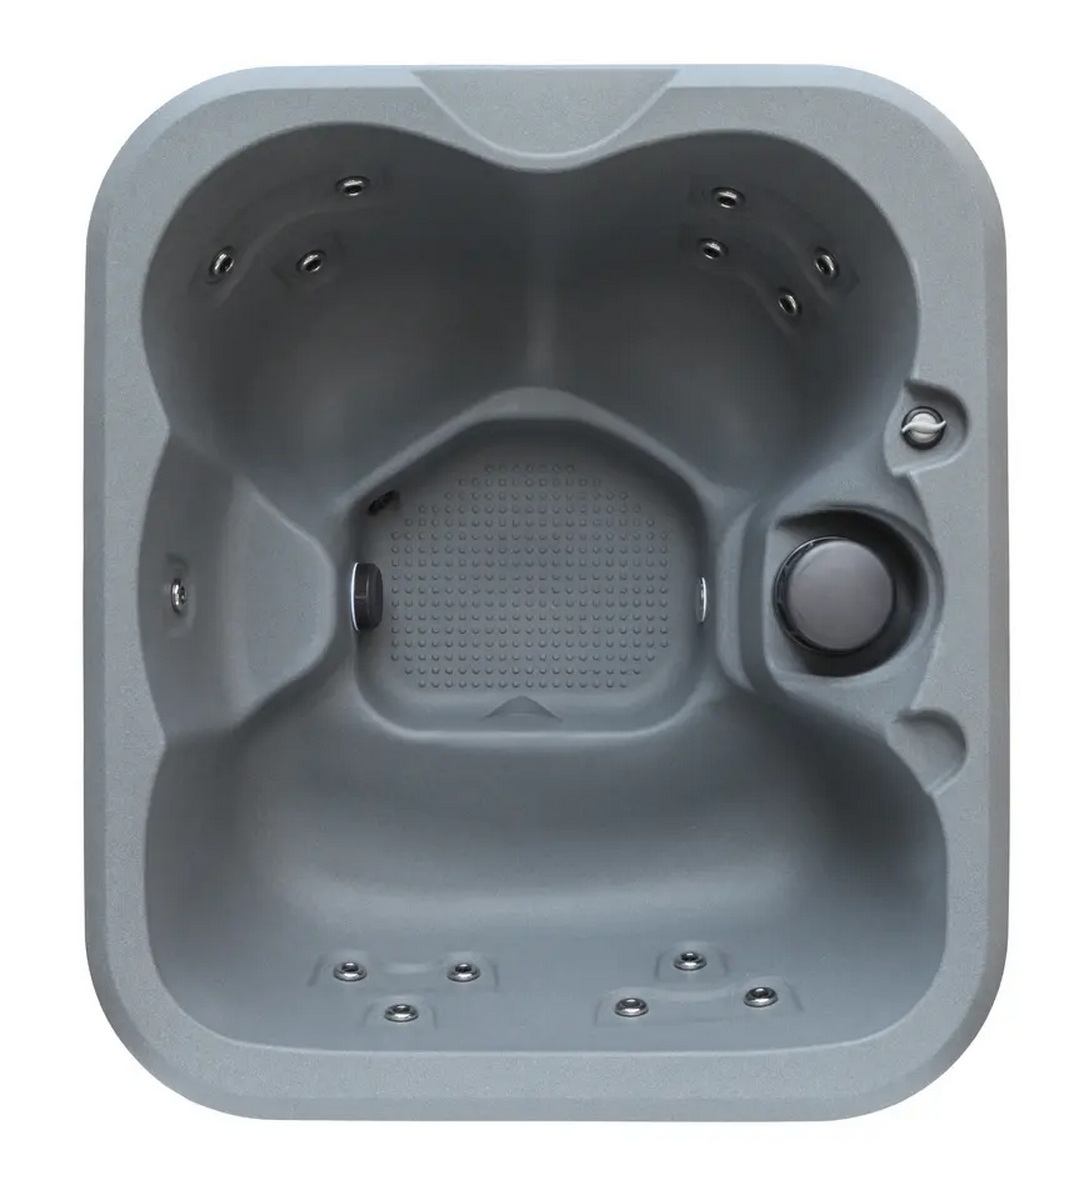 Jacuzzi Hot Spa 1700-MD 5 persoane